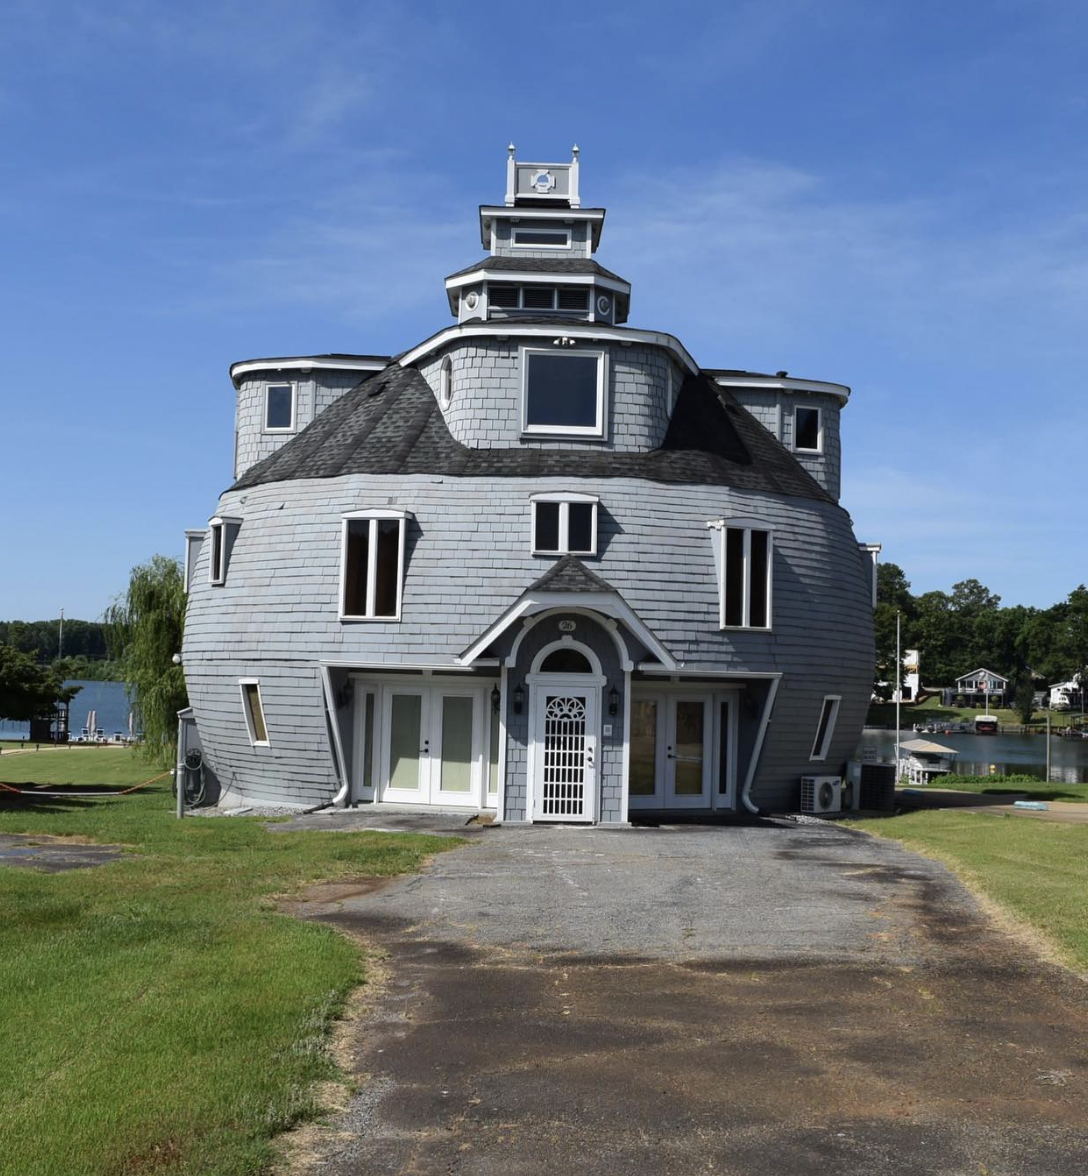 cursed zillow photo - round house on lake bowen